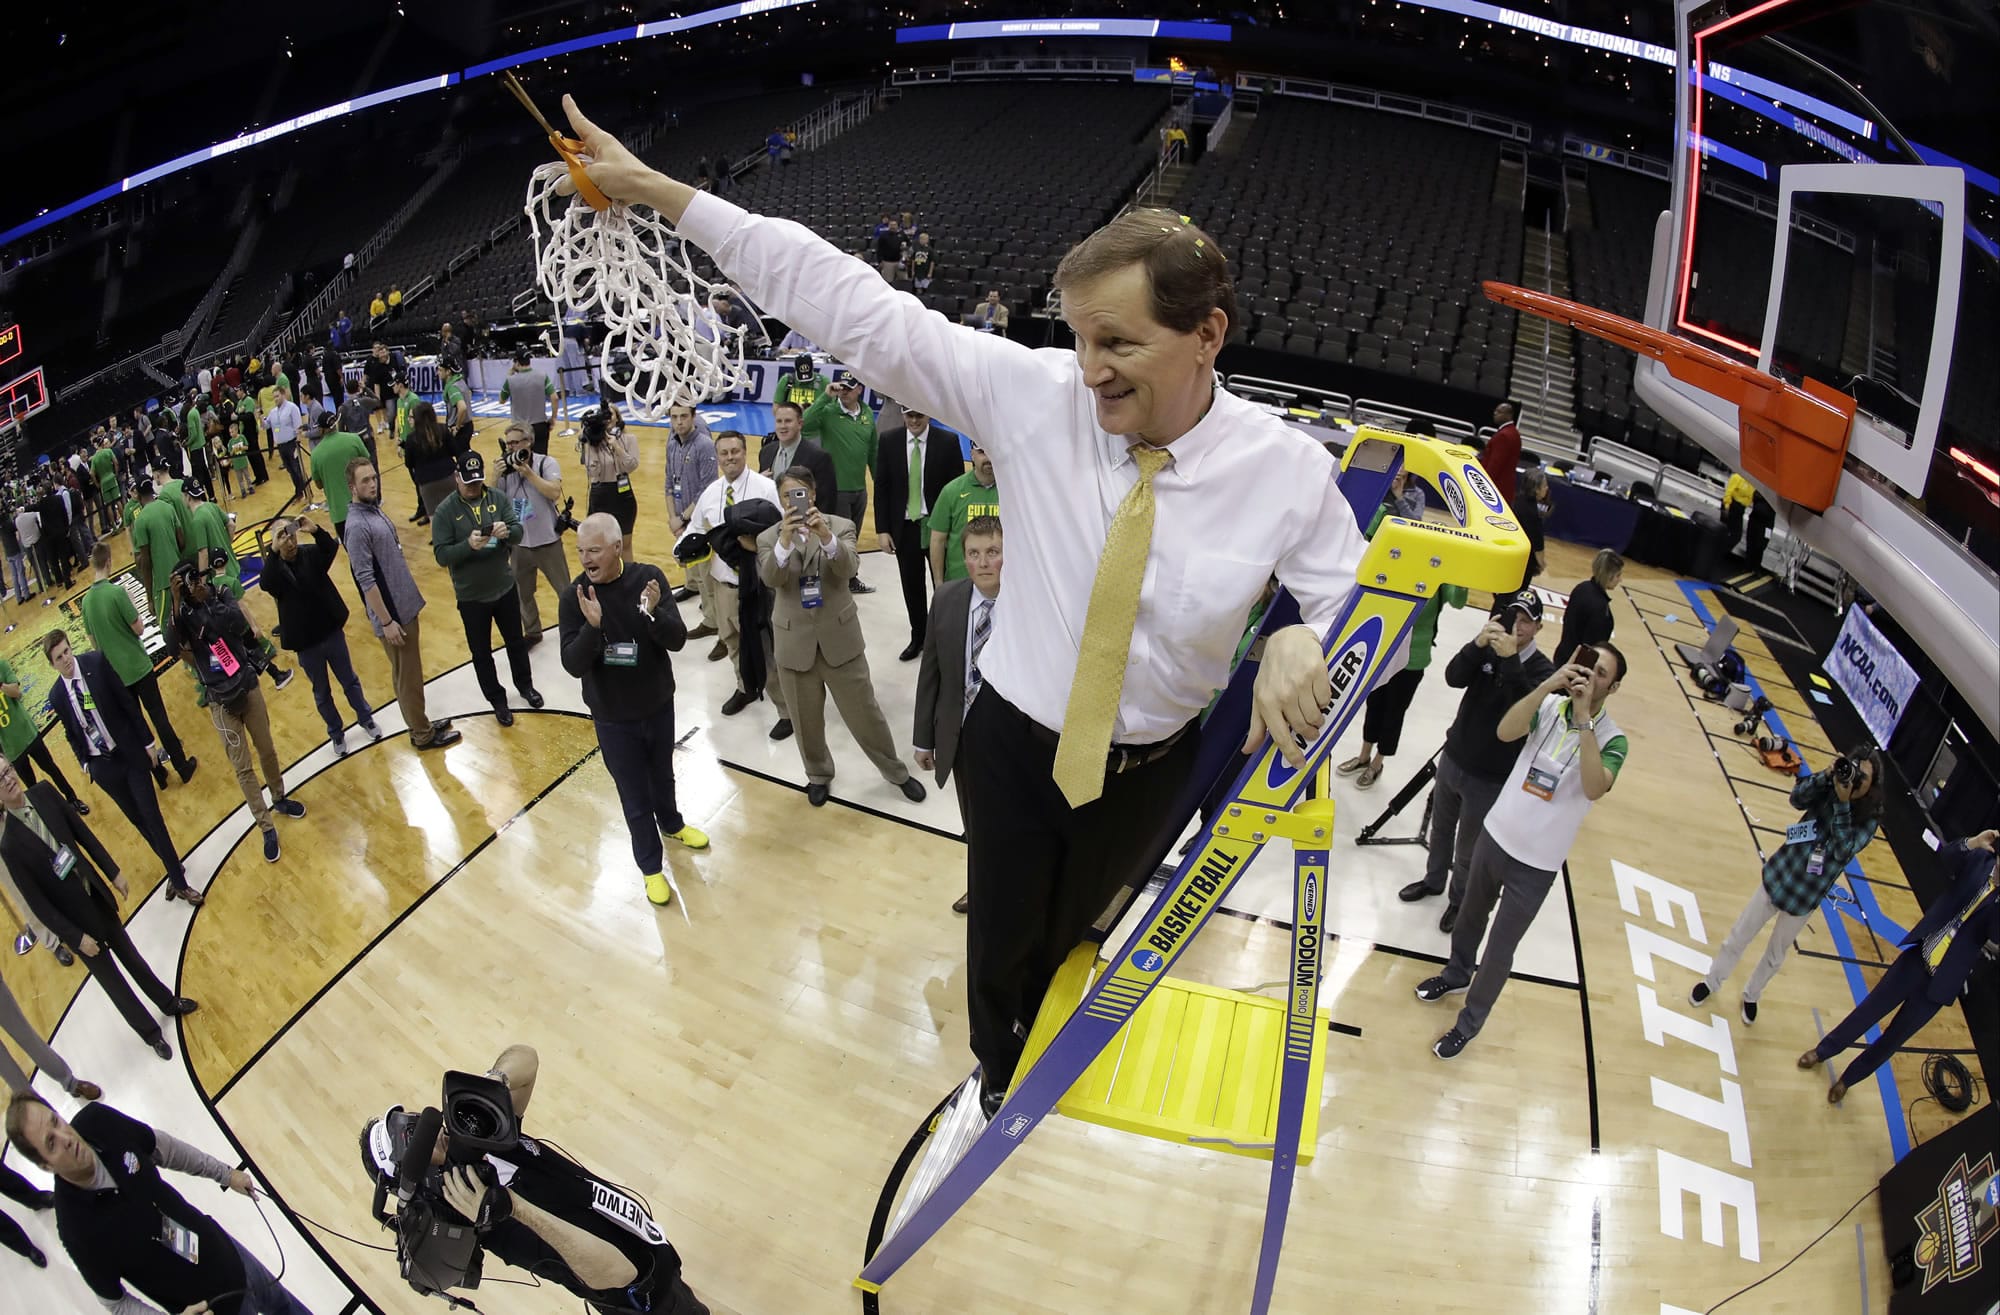 Oregon coach Dana Altman cuts down the net after the team's Midwest Regional final against Kansas in the NCAA men's college basketball tournament, Saturday, March 25, 2017, in Kansas City, Mo. Oregon won 74-60.